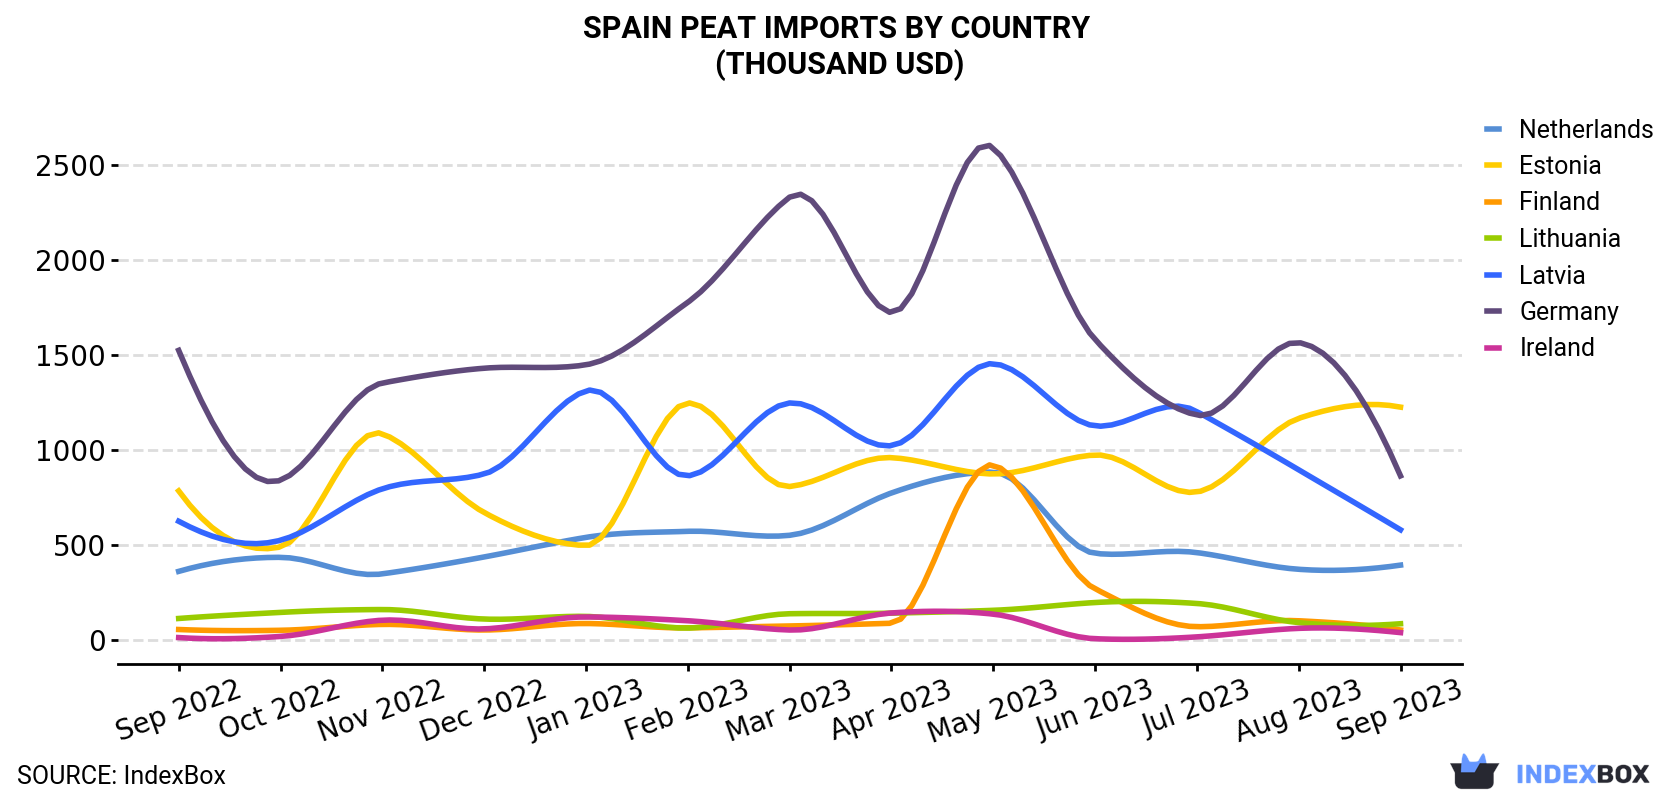 Spain Peat Imports By Country (Thousand USD)